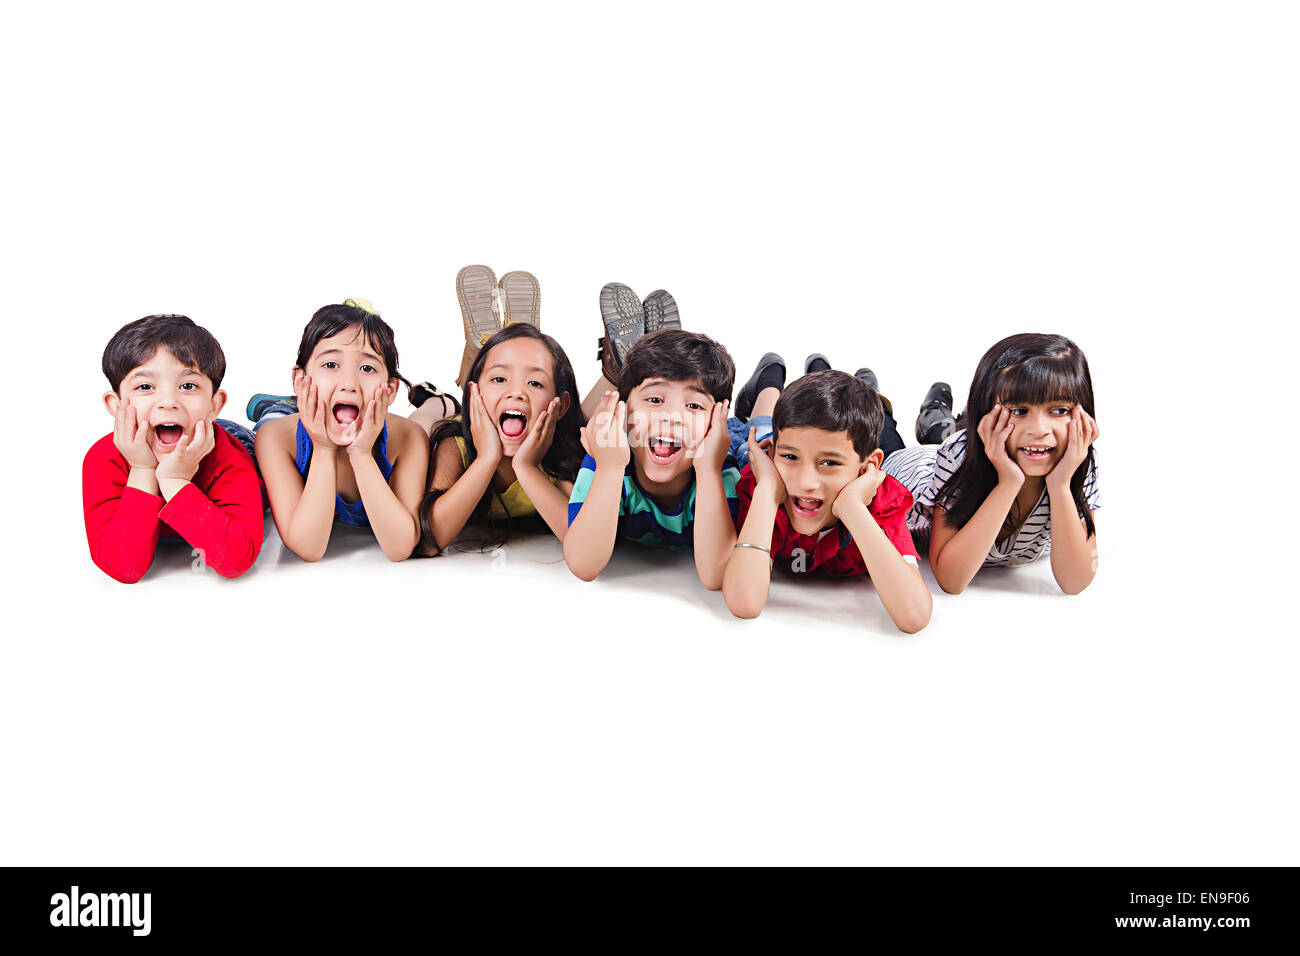 indian Kids group Friends Relaxing Stock Photo